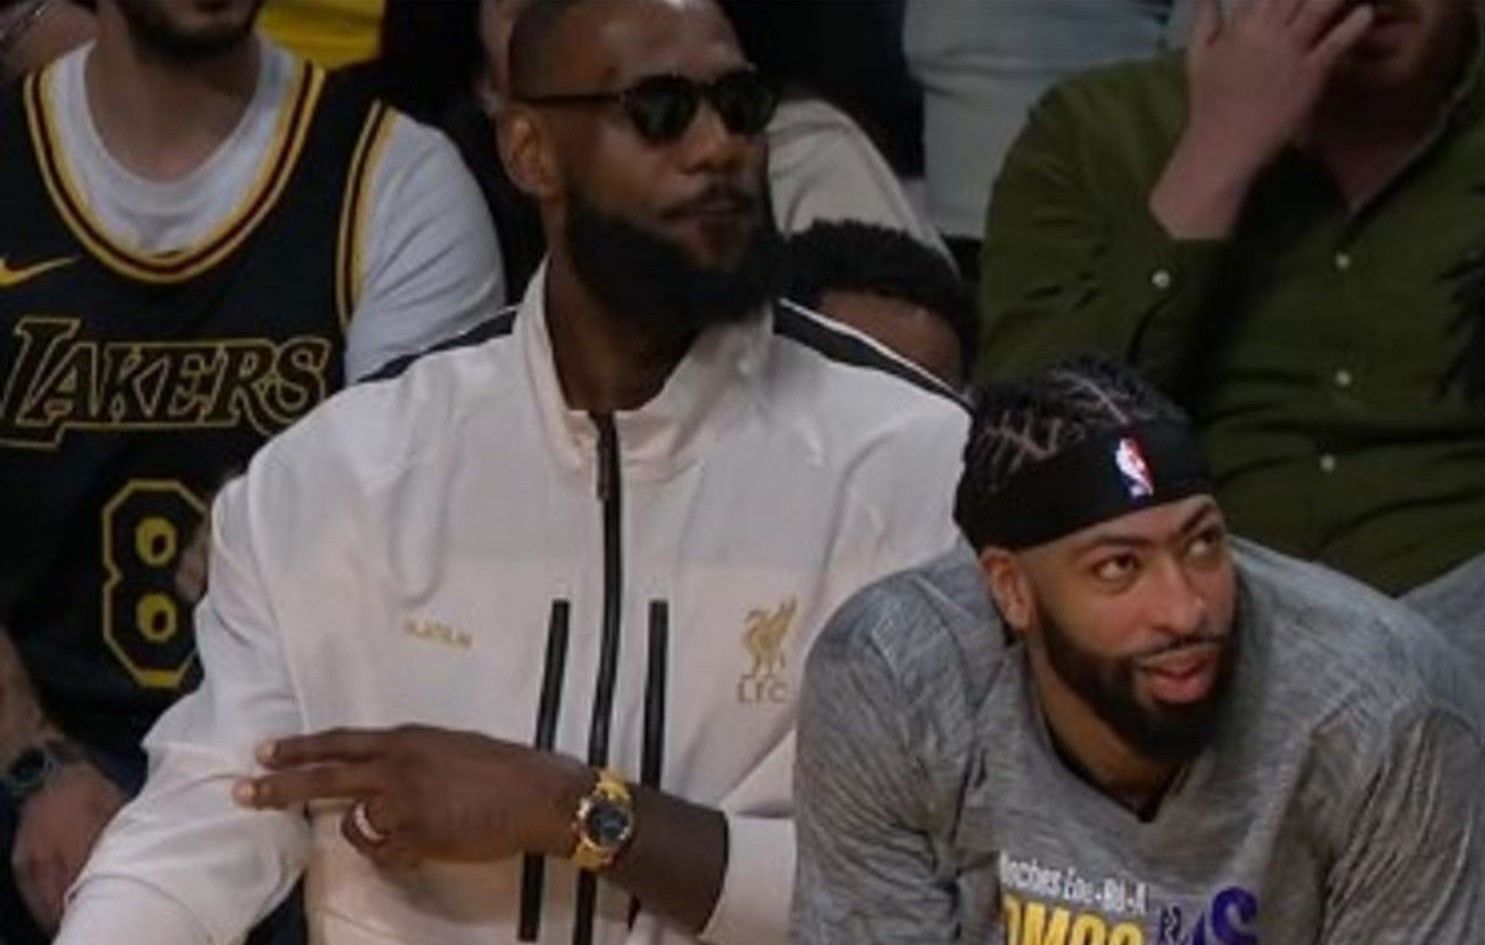 Injured LeBron James appears courtside for Bucks-Lakers donning $412,000 Patek Philippe.